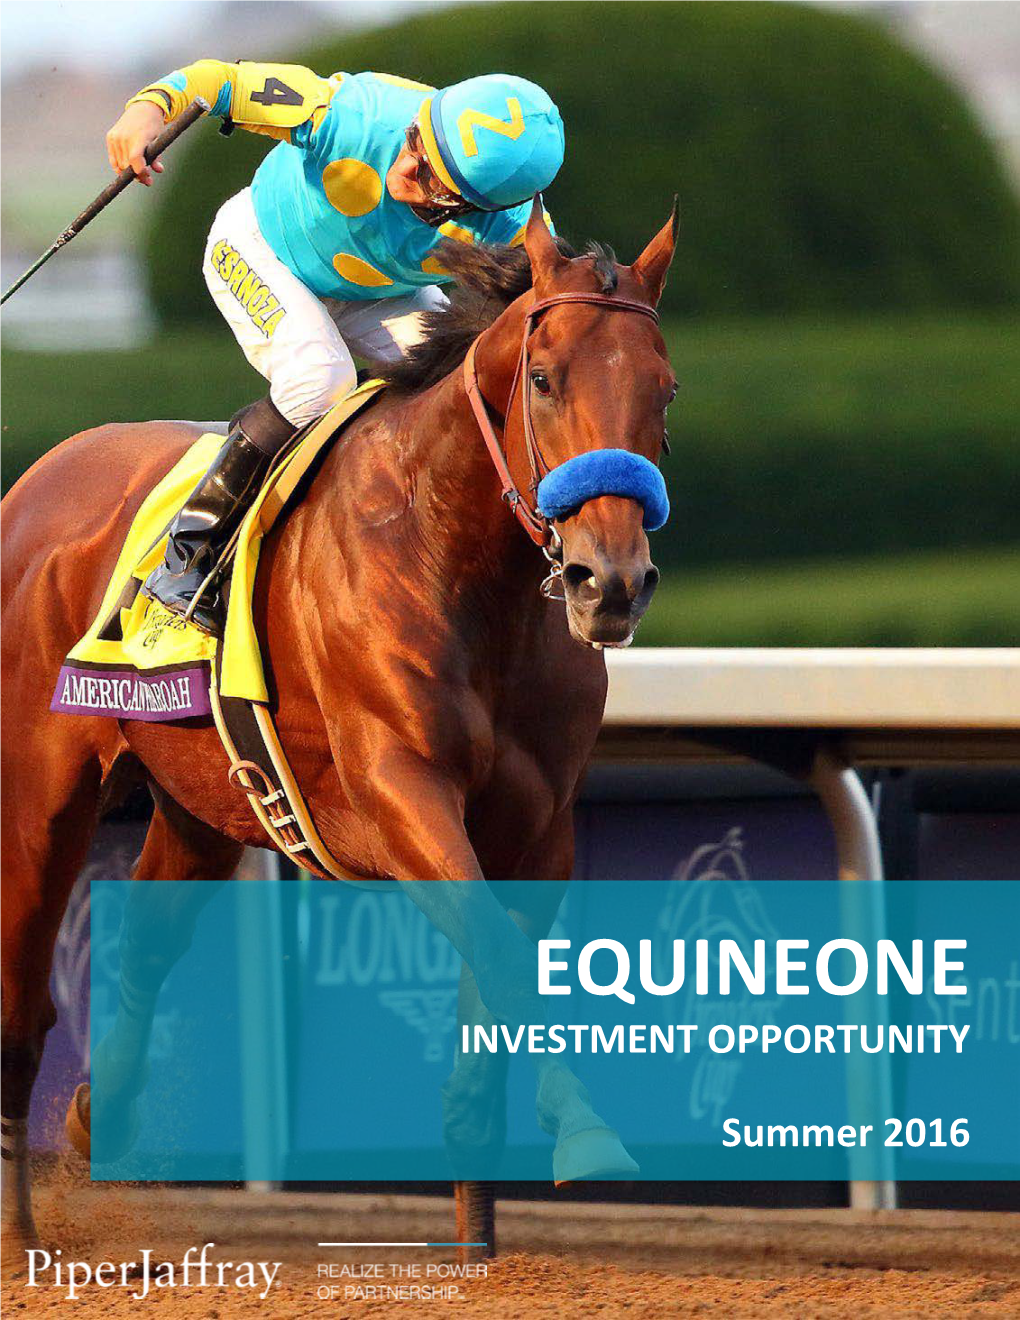 Equineone Investment Opportunity